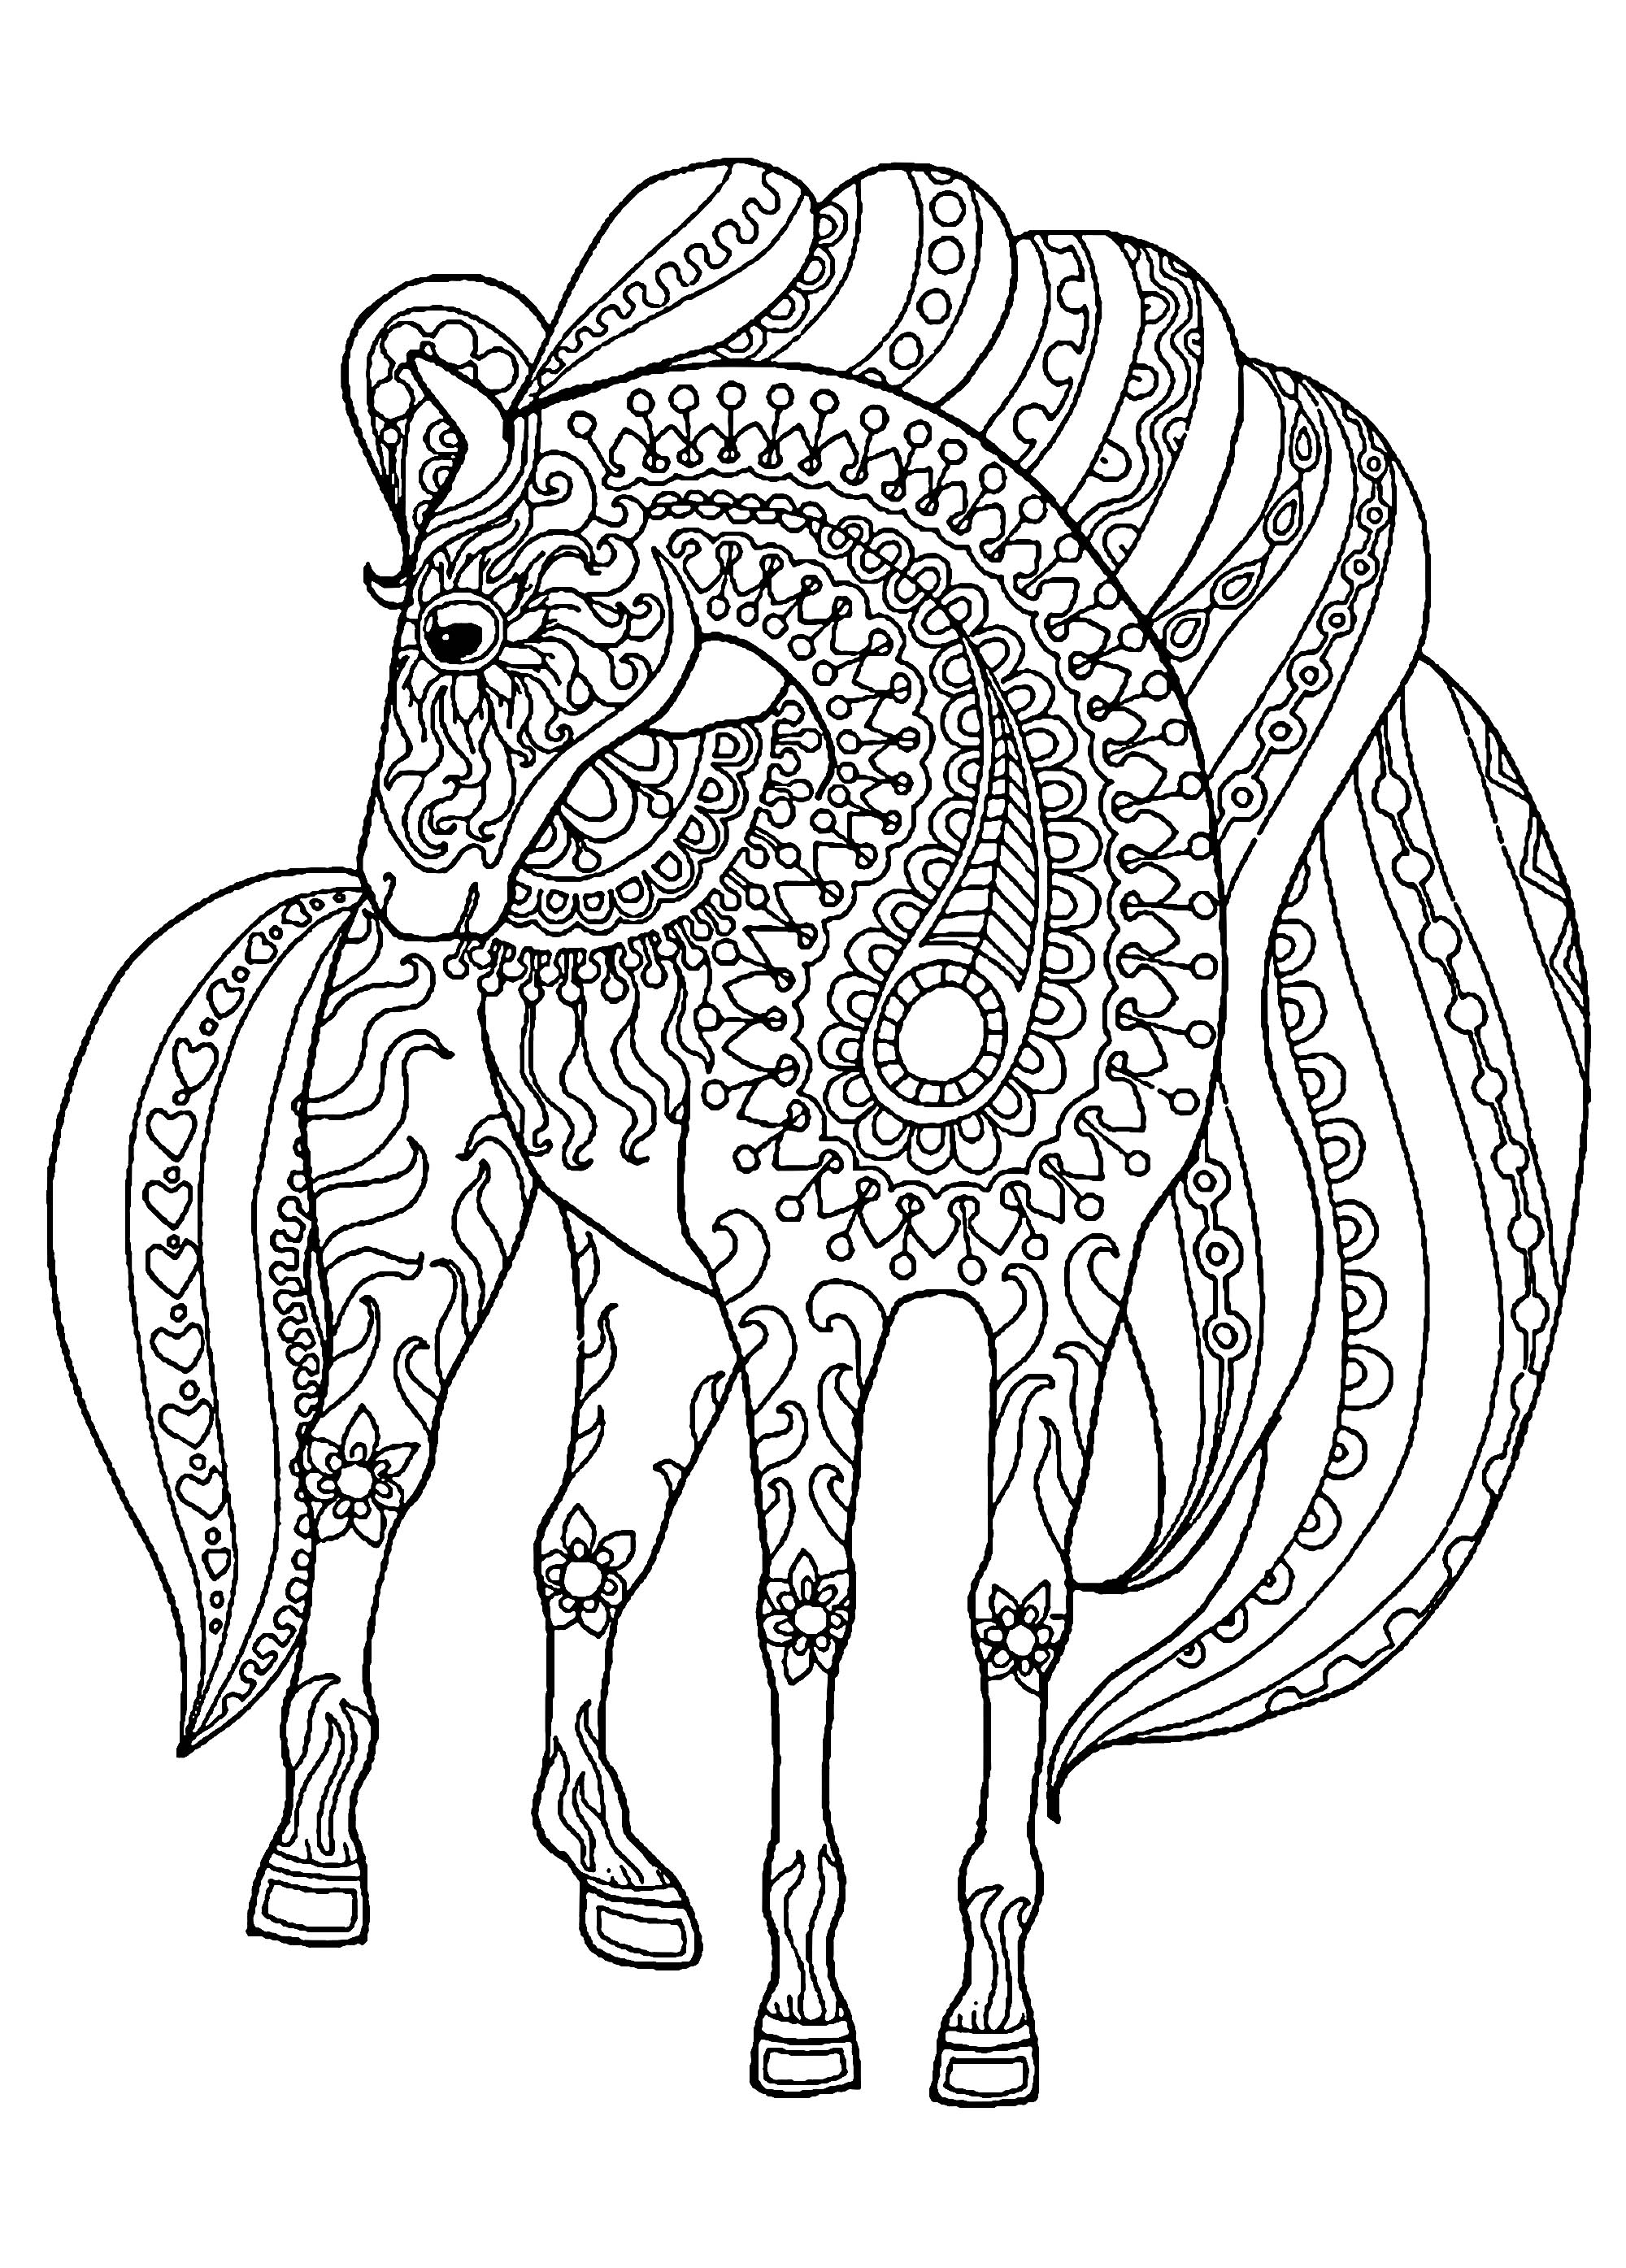 Horse with patterns free to color for children Horses